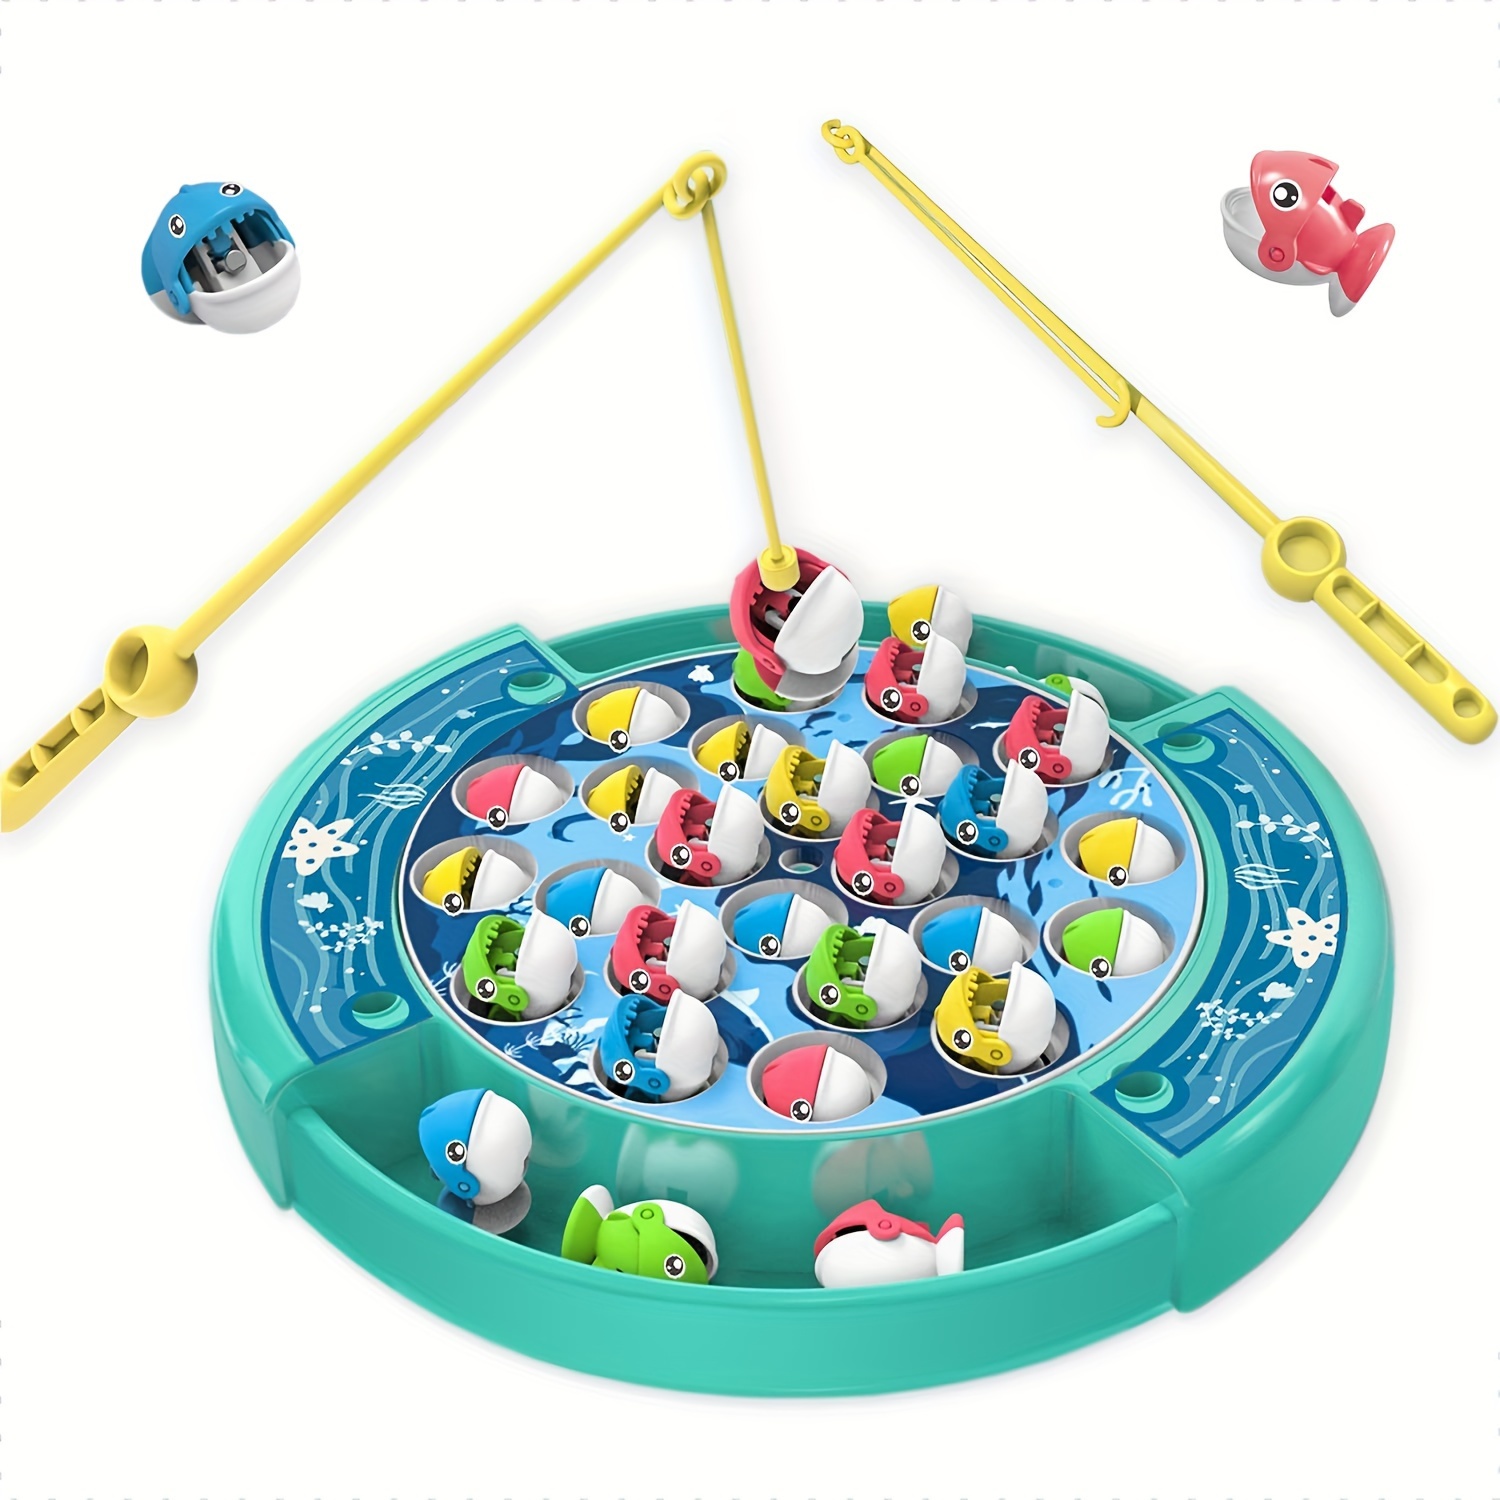 Kids Electric Musical Rotating Fishing Toy, Rotating Board Games Fishing  Toy Set with Cute Music and 24 Fish, Magnetic Fishing Game Simulation  Fishing